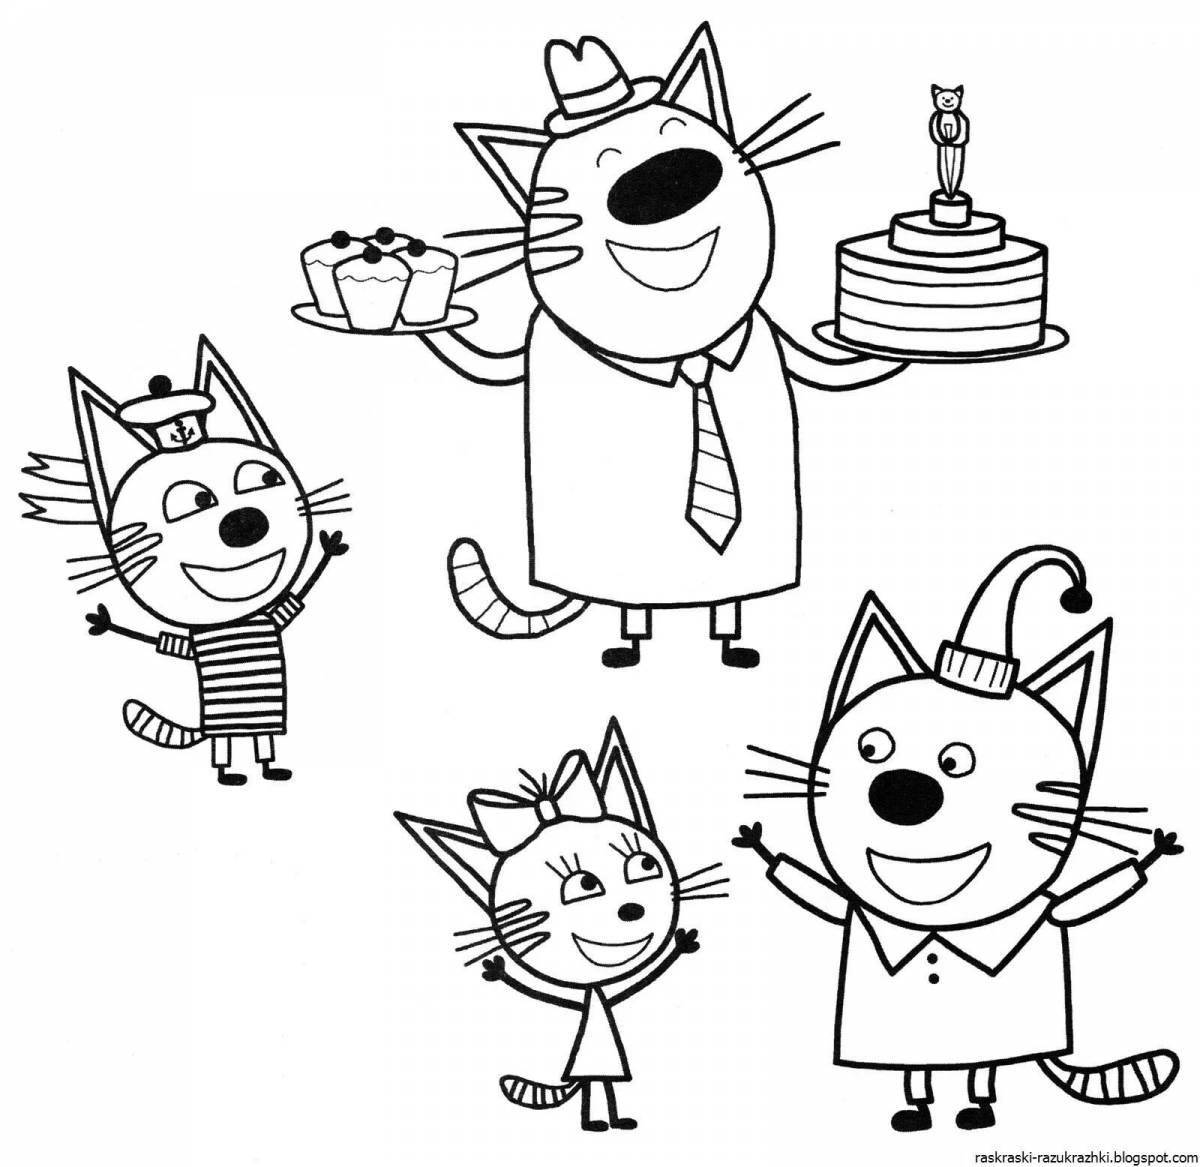 Coloring three cats for girls 3 years old